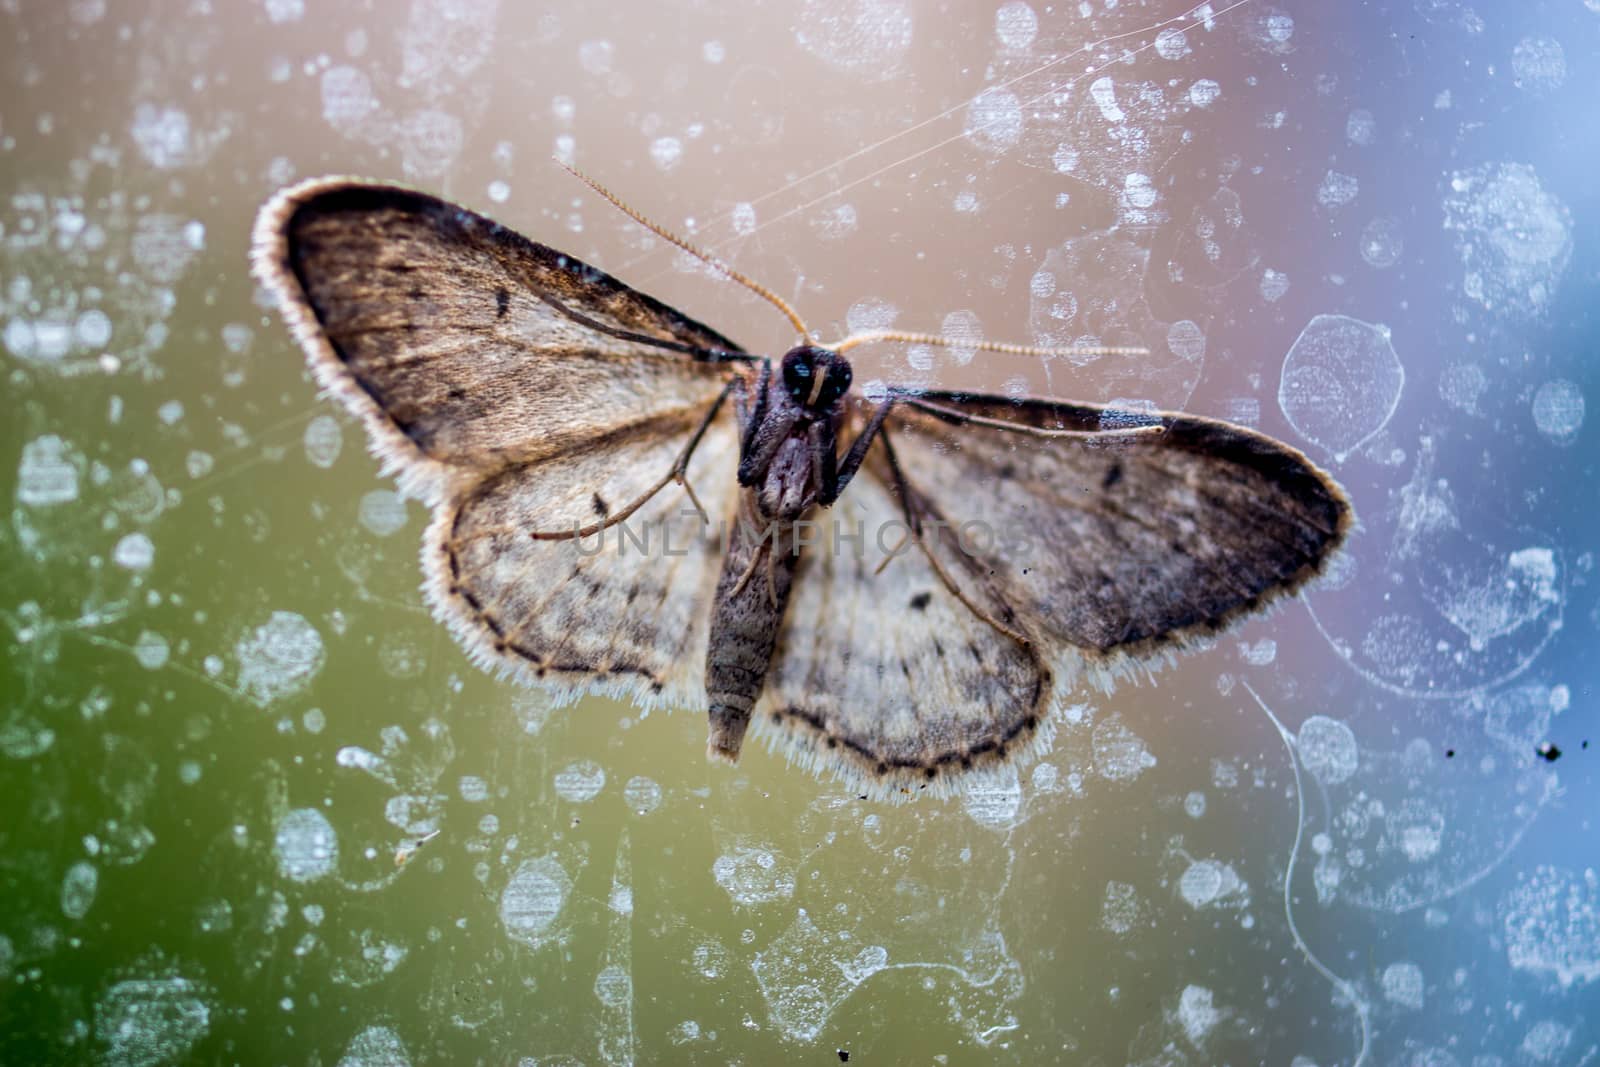 Brown moth throught wet oil covered glass with green and blue background